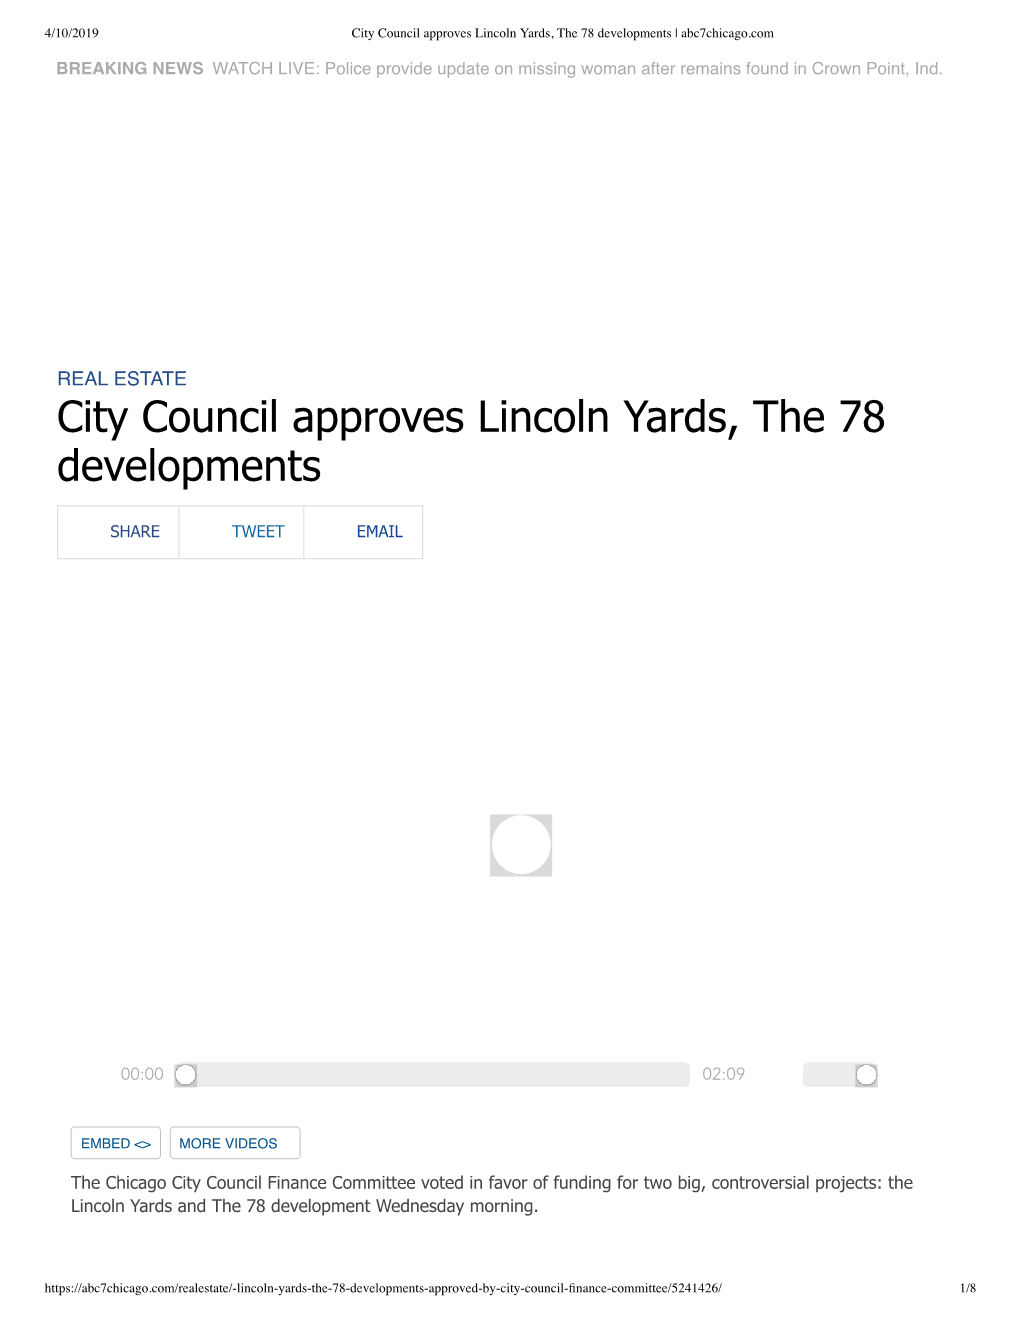 City Council Approves Lincoln Yards, the 78 Developments | Abc7chicago.Com